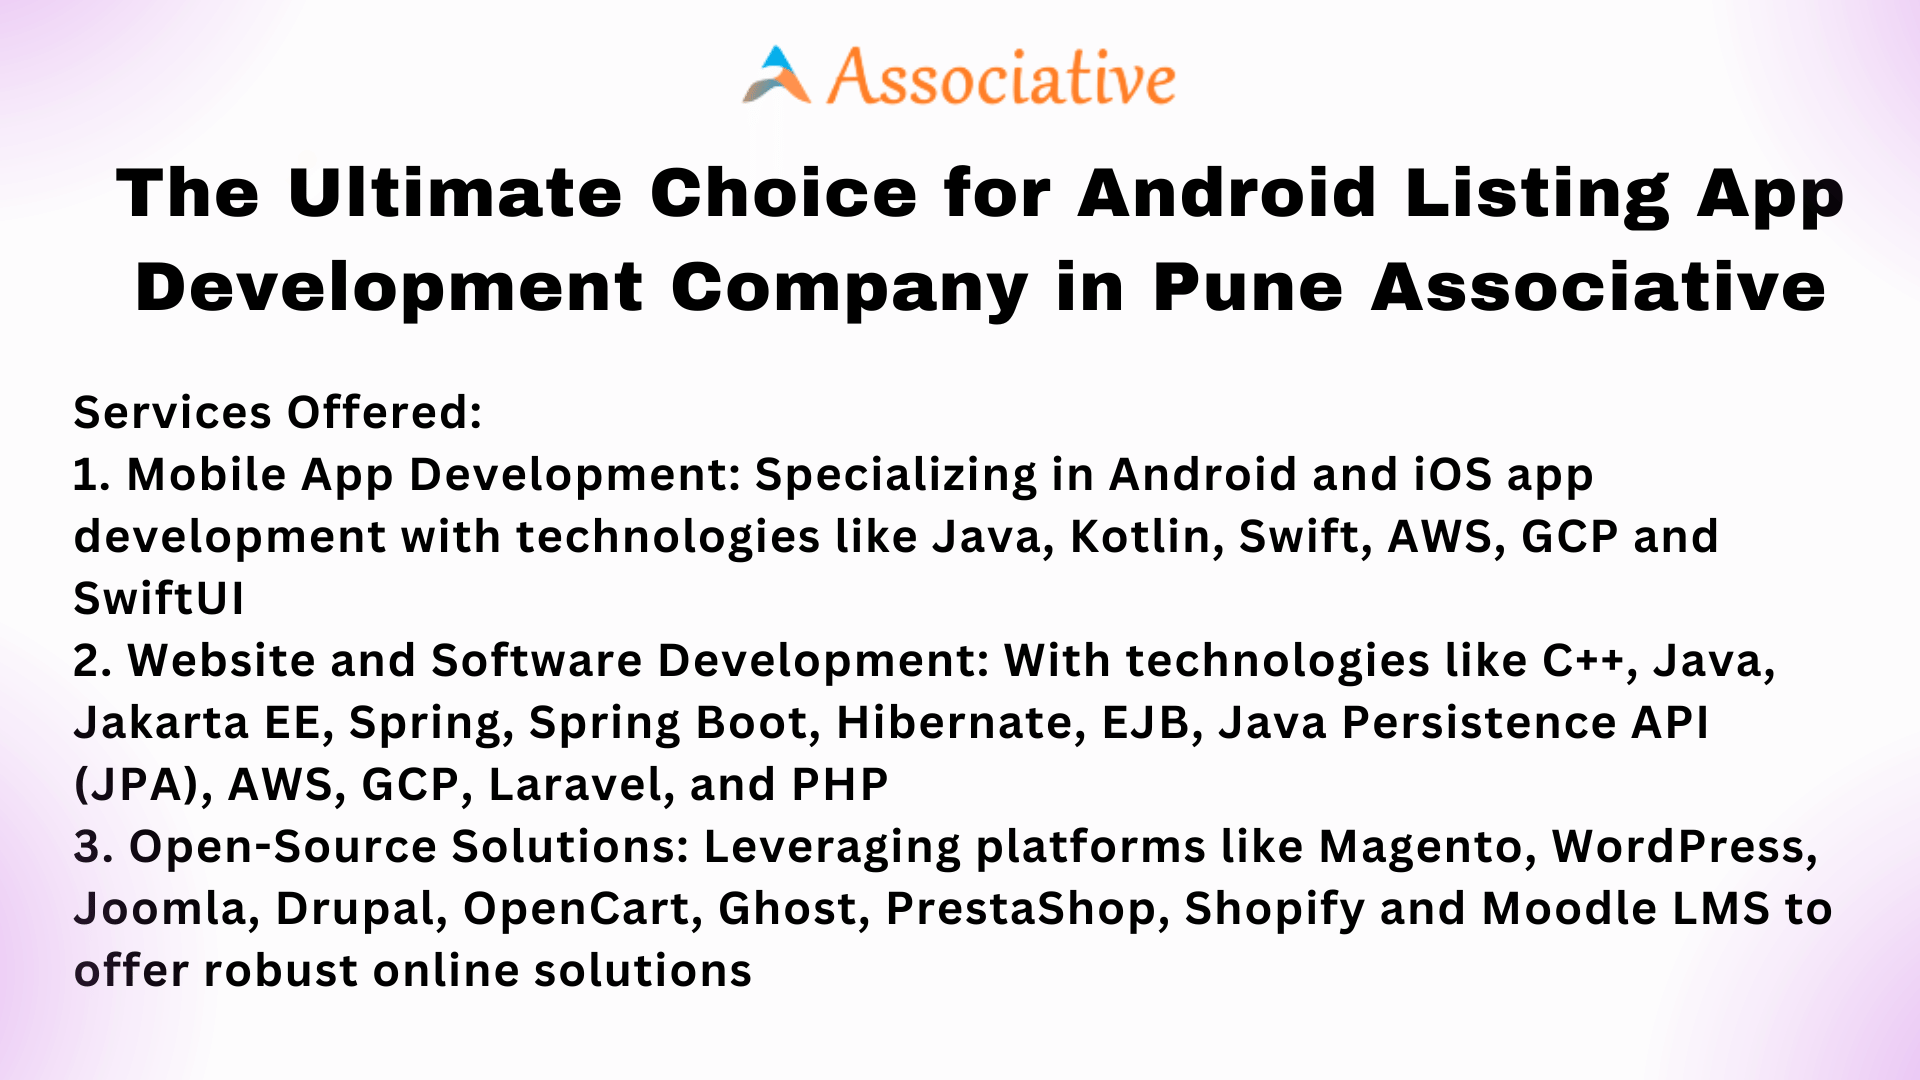 The Ultimate Choice for Android Listing App Development Company in Pune Associative